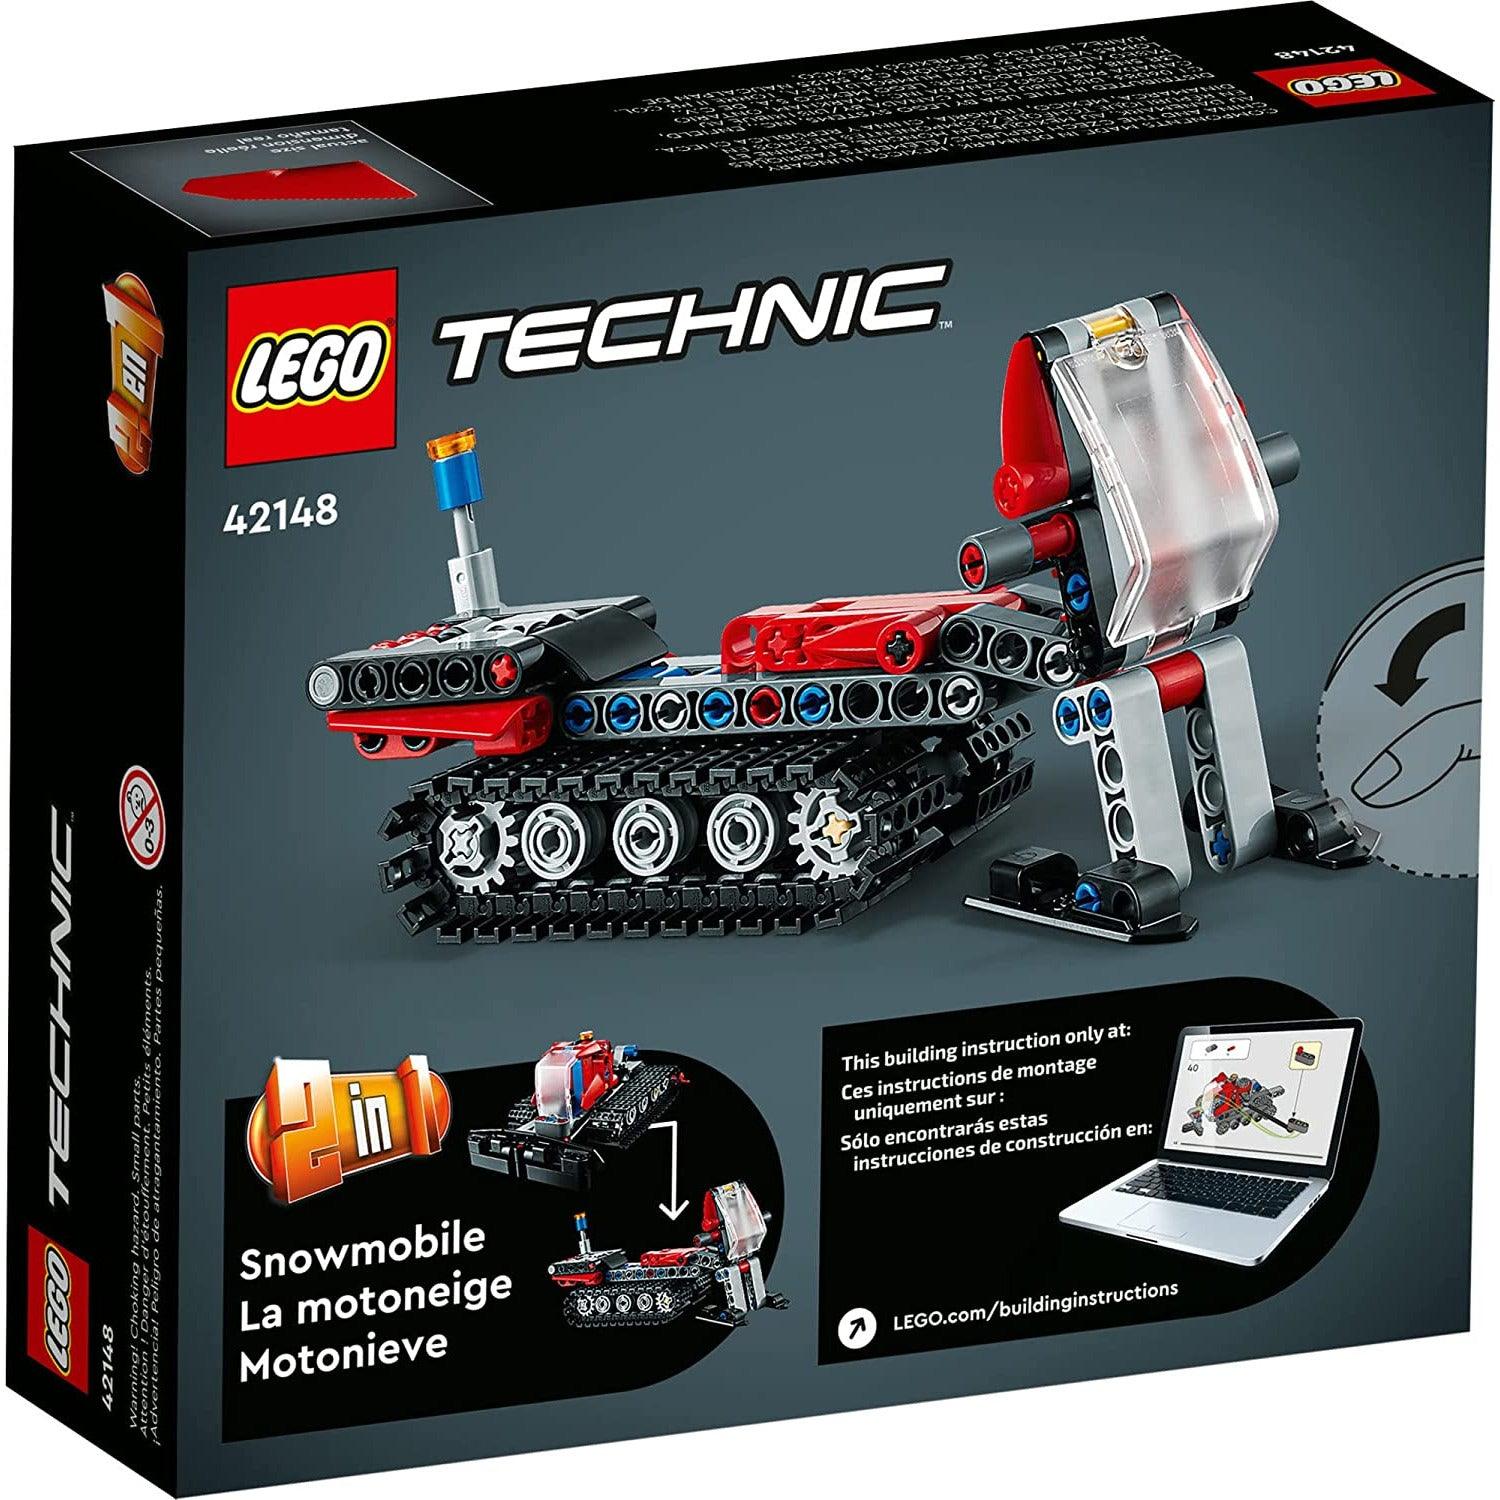 LEGO 42148 Technic Snow Groomer to Snowmobile, 2in1 Vehicle Model Set (178 Pieces) - BumbleToys - 18+, 5-7 Years, Boys, Clearance, LEGO, OXE, Pre-Order, Technic